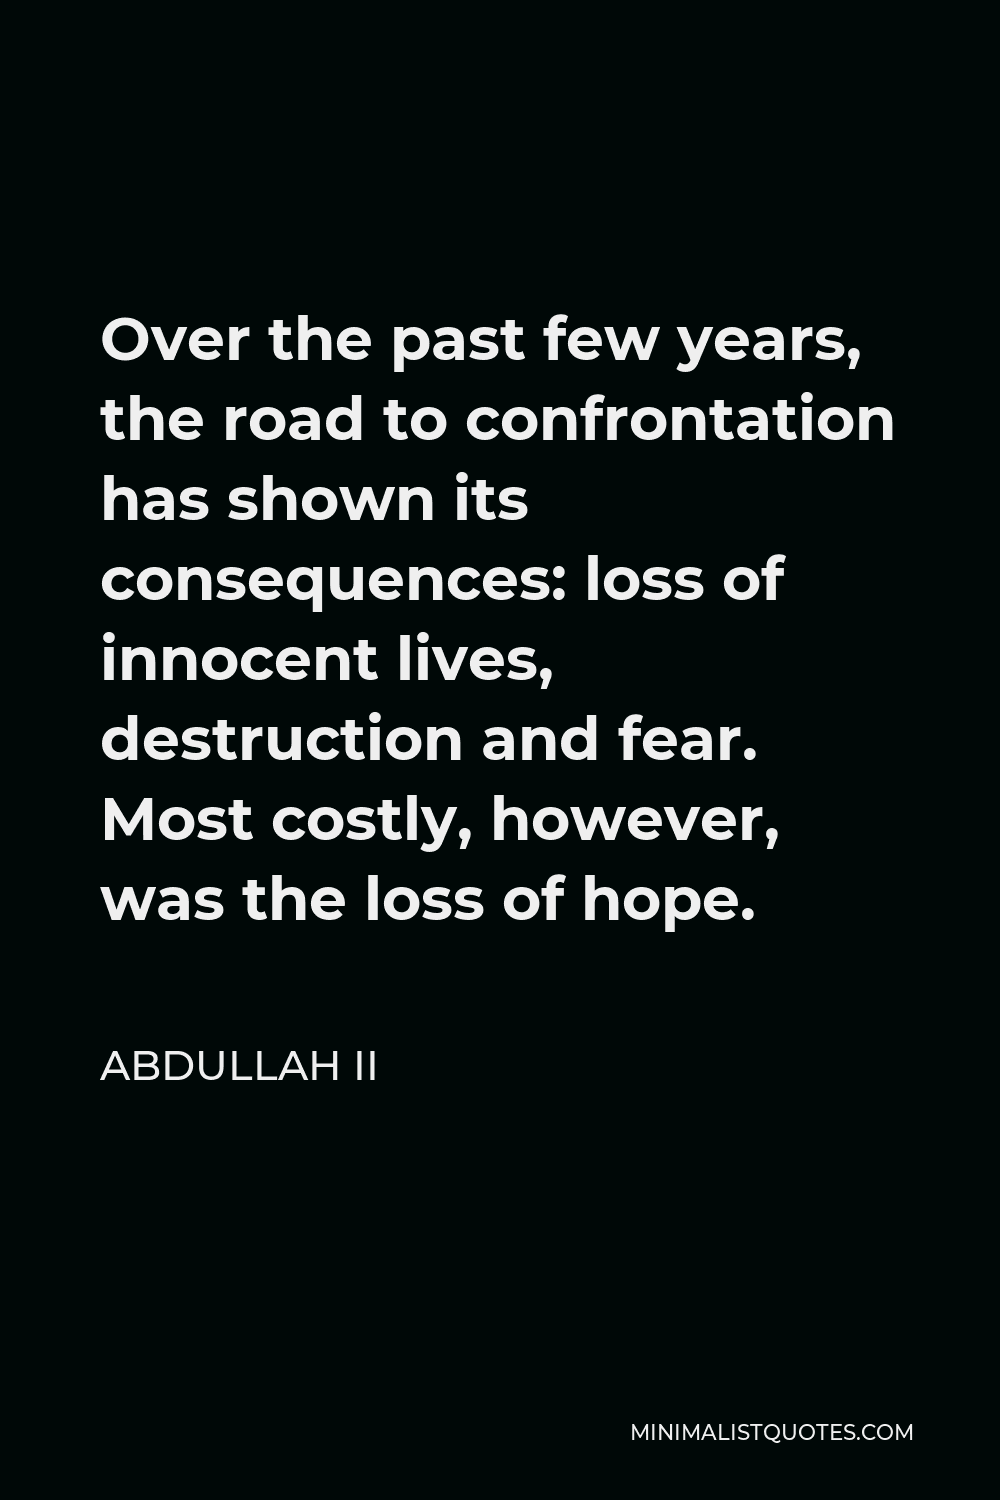 Abdullah II Quote - Over the past few years, the road to confrontation has shown its consequences: loss of innocent lives, destruction and fear. Most costly, however, was the loss of hope.